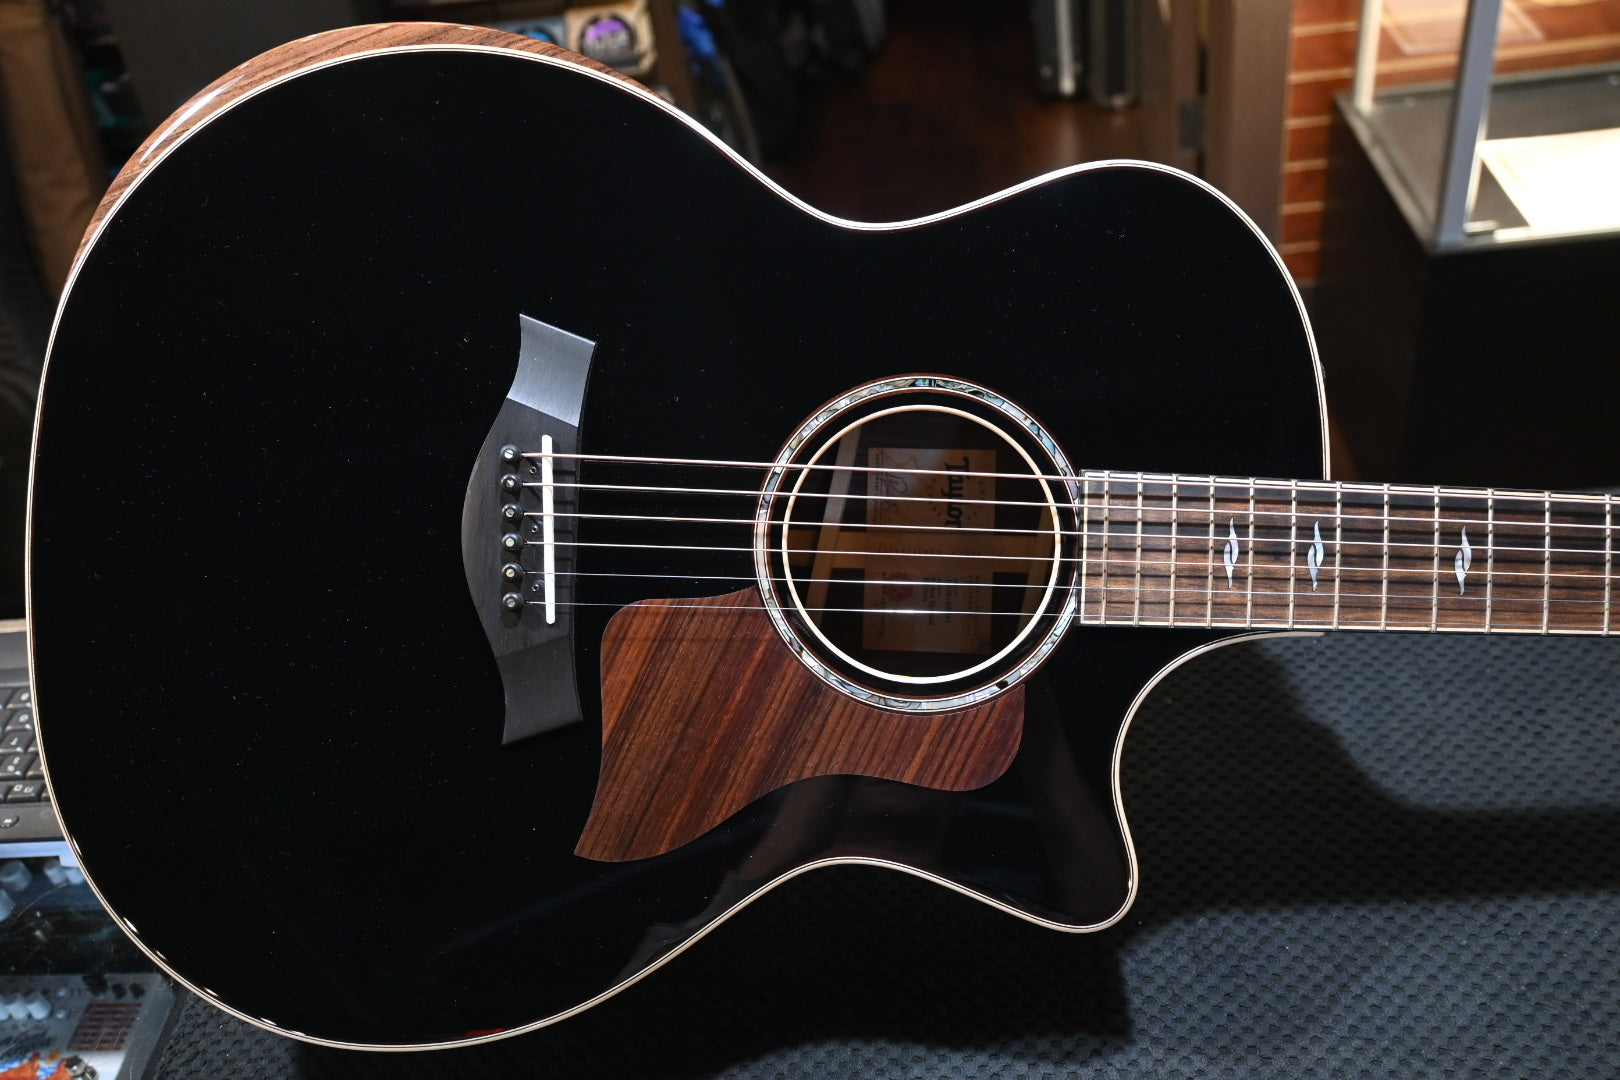 Taylor Builder’s Edition 814ce - Blacktop Guitar #3041 w/ Taylor buy one get a GS Mini for $199 Promo! - Danville Music